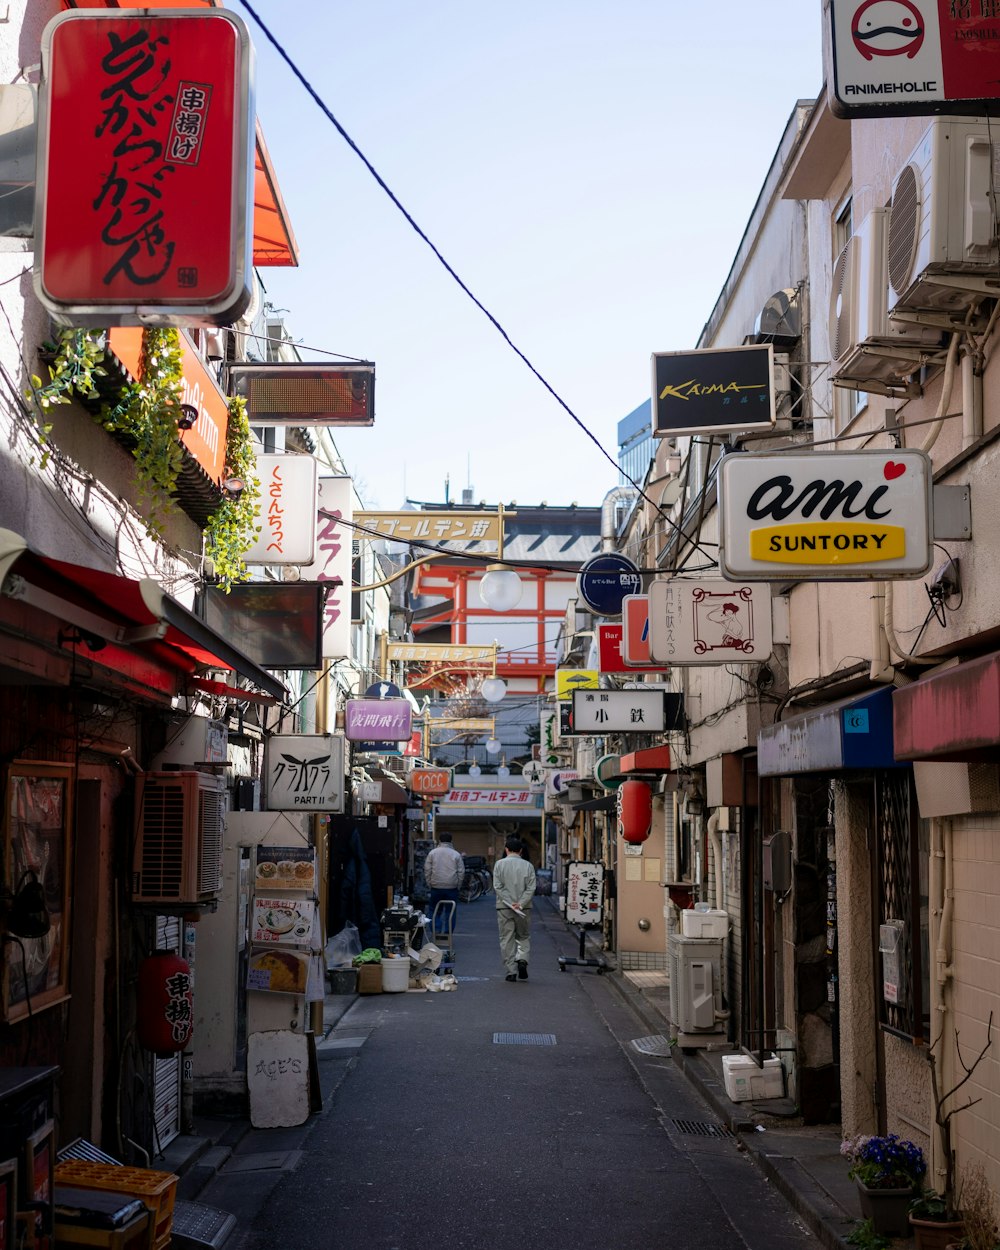 a narrow alley way with signs hanging from the buildings